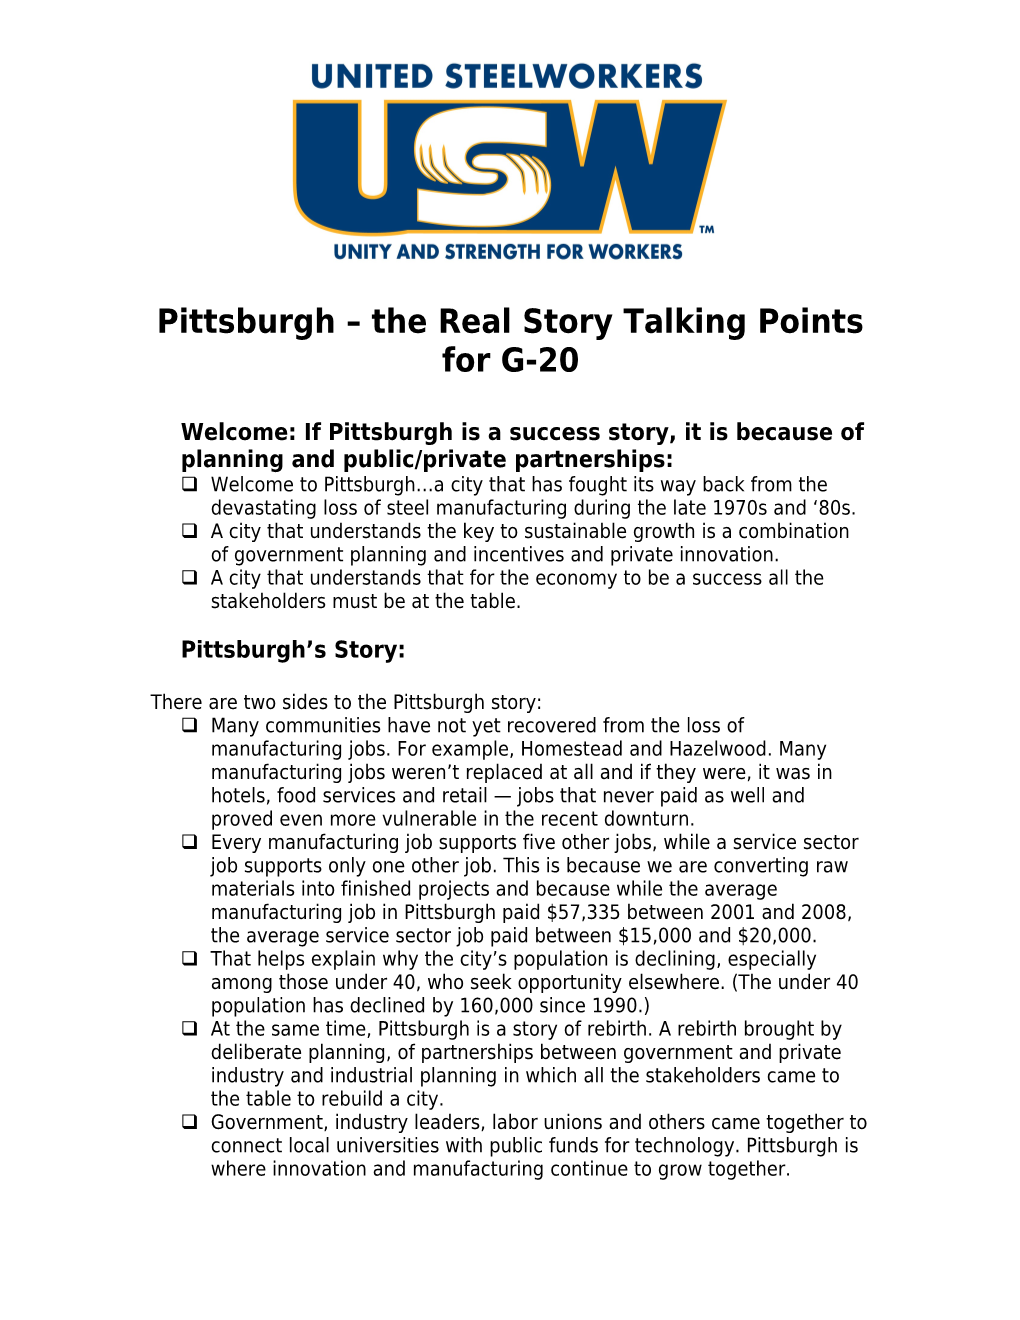 Pittsburgh the Real Story Talking Points for G-20